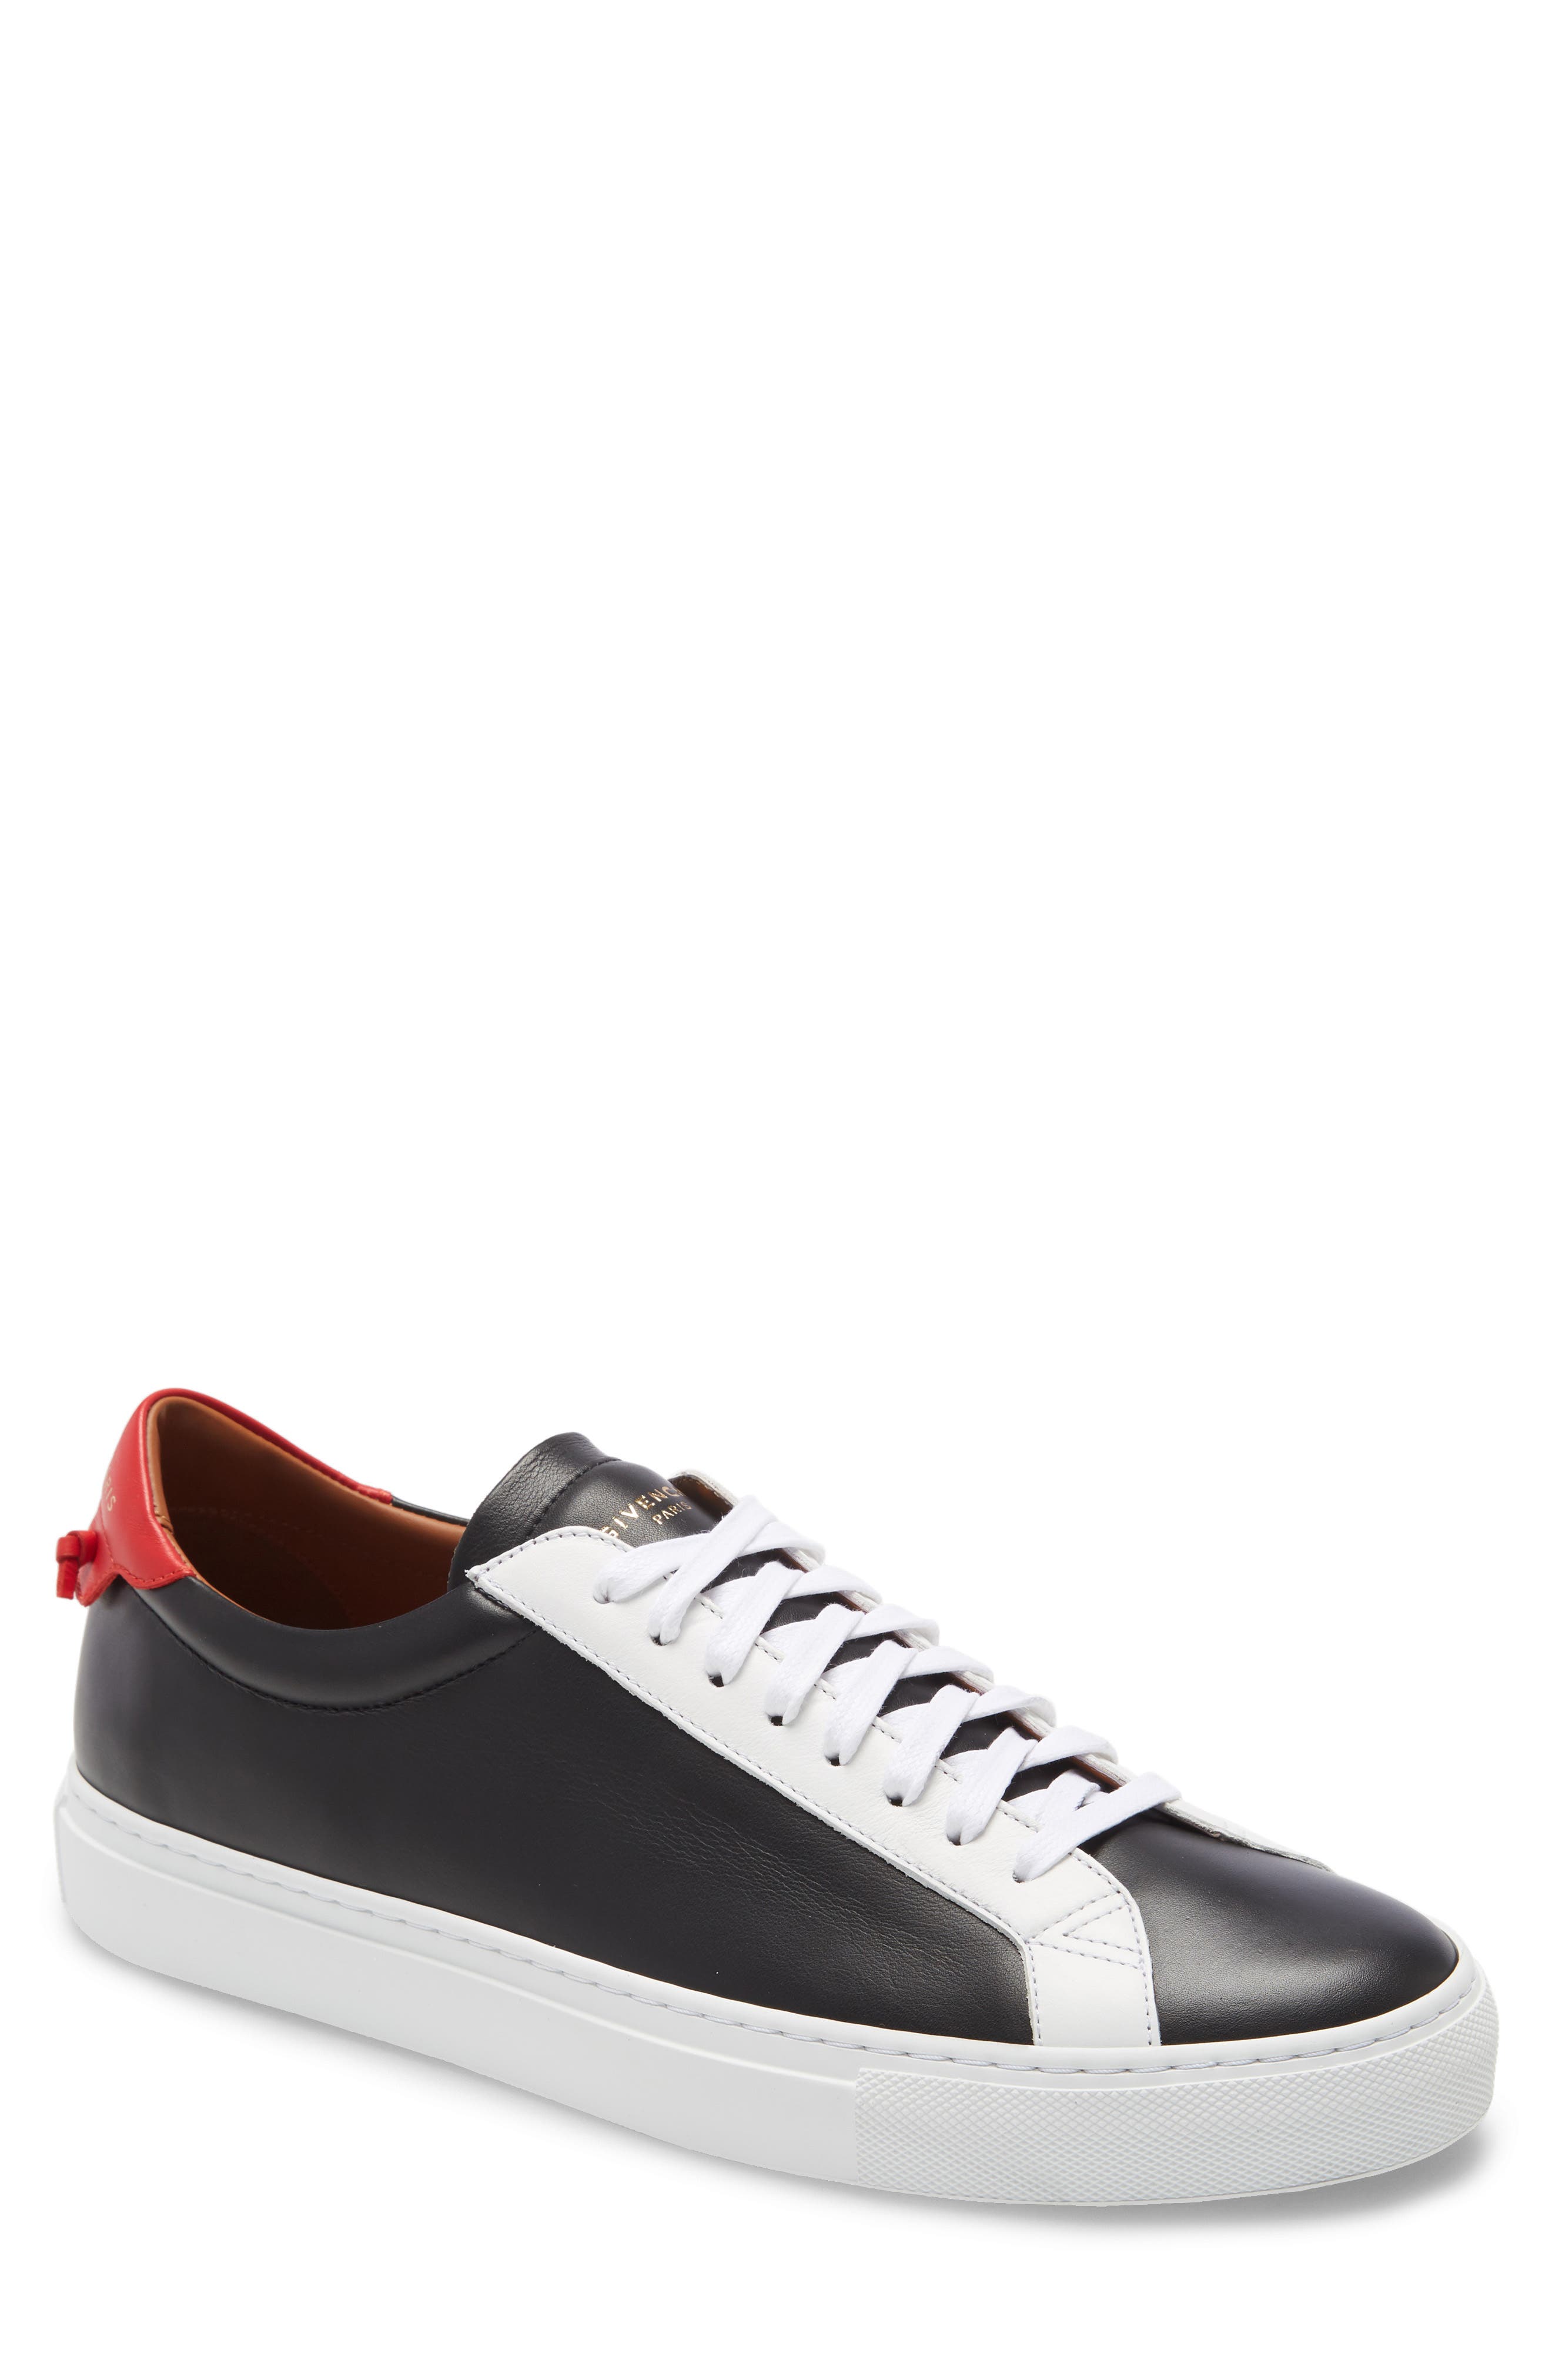 Must-Have Men's Givenchy Shoes | Nordstrom